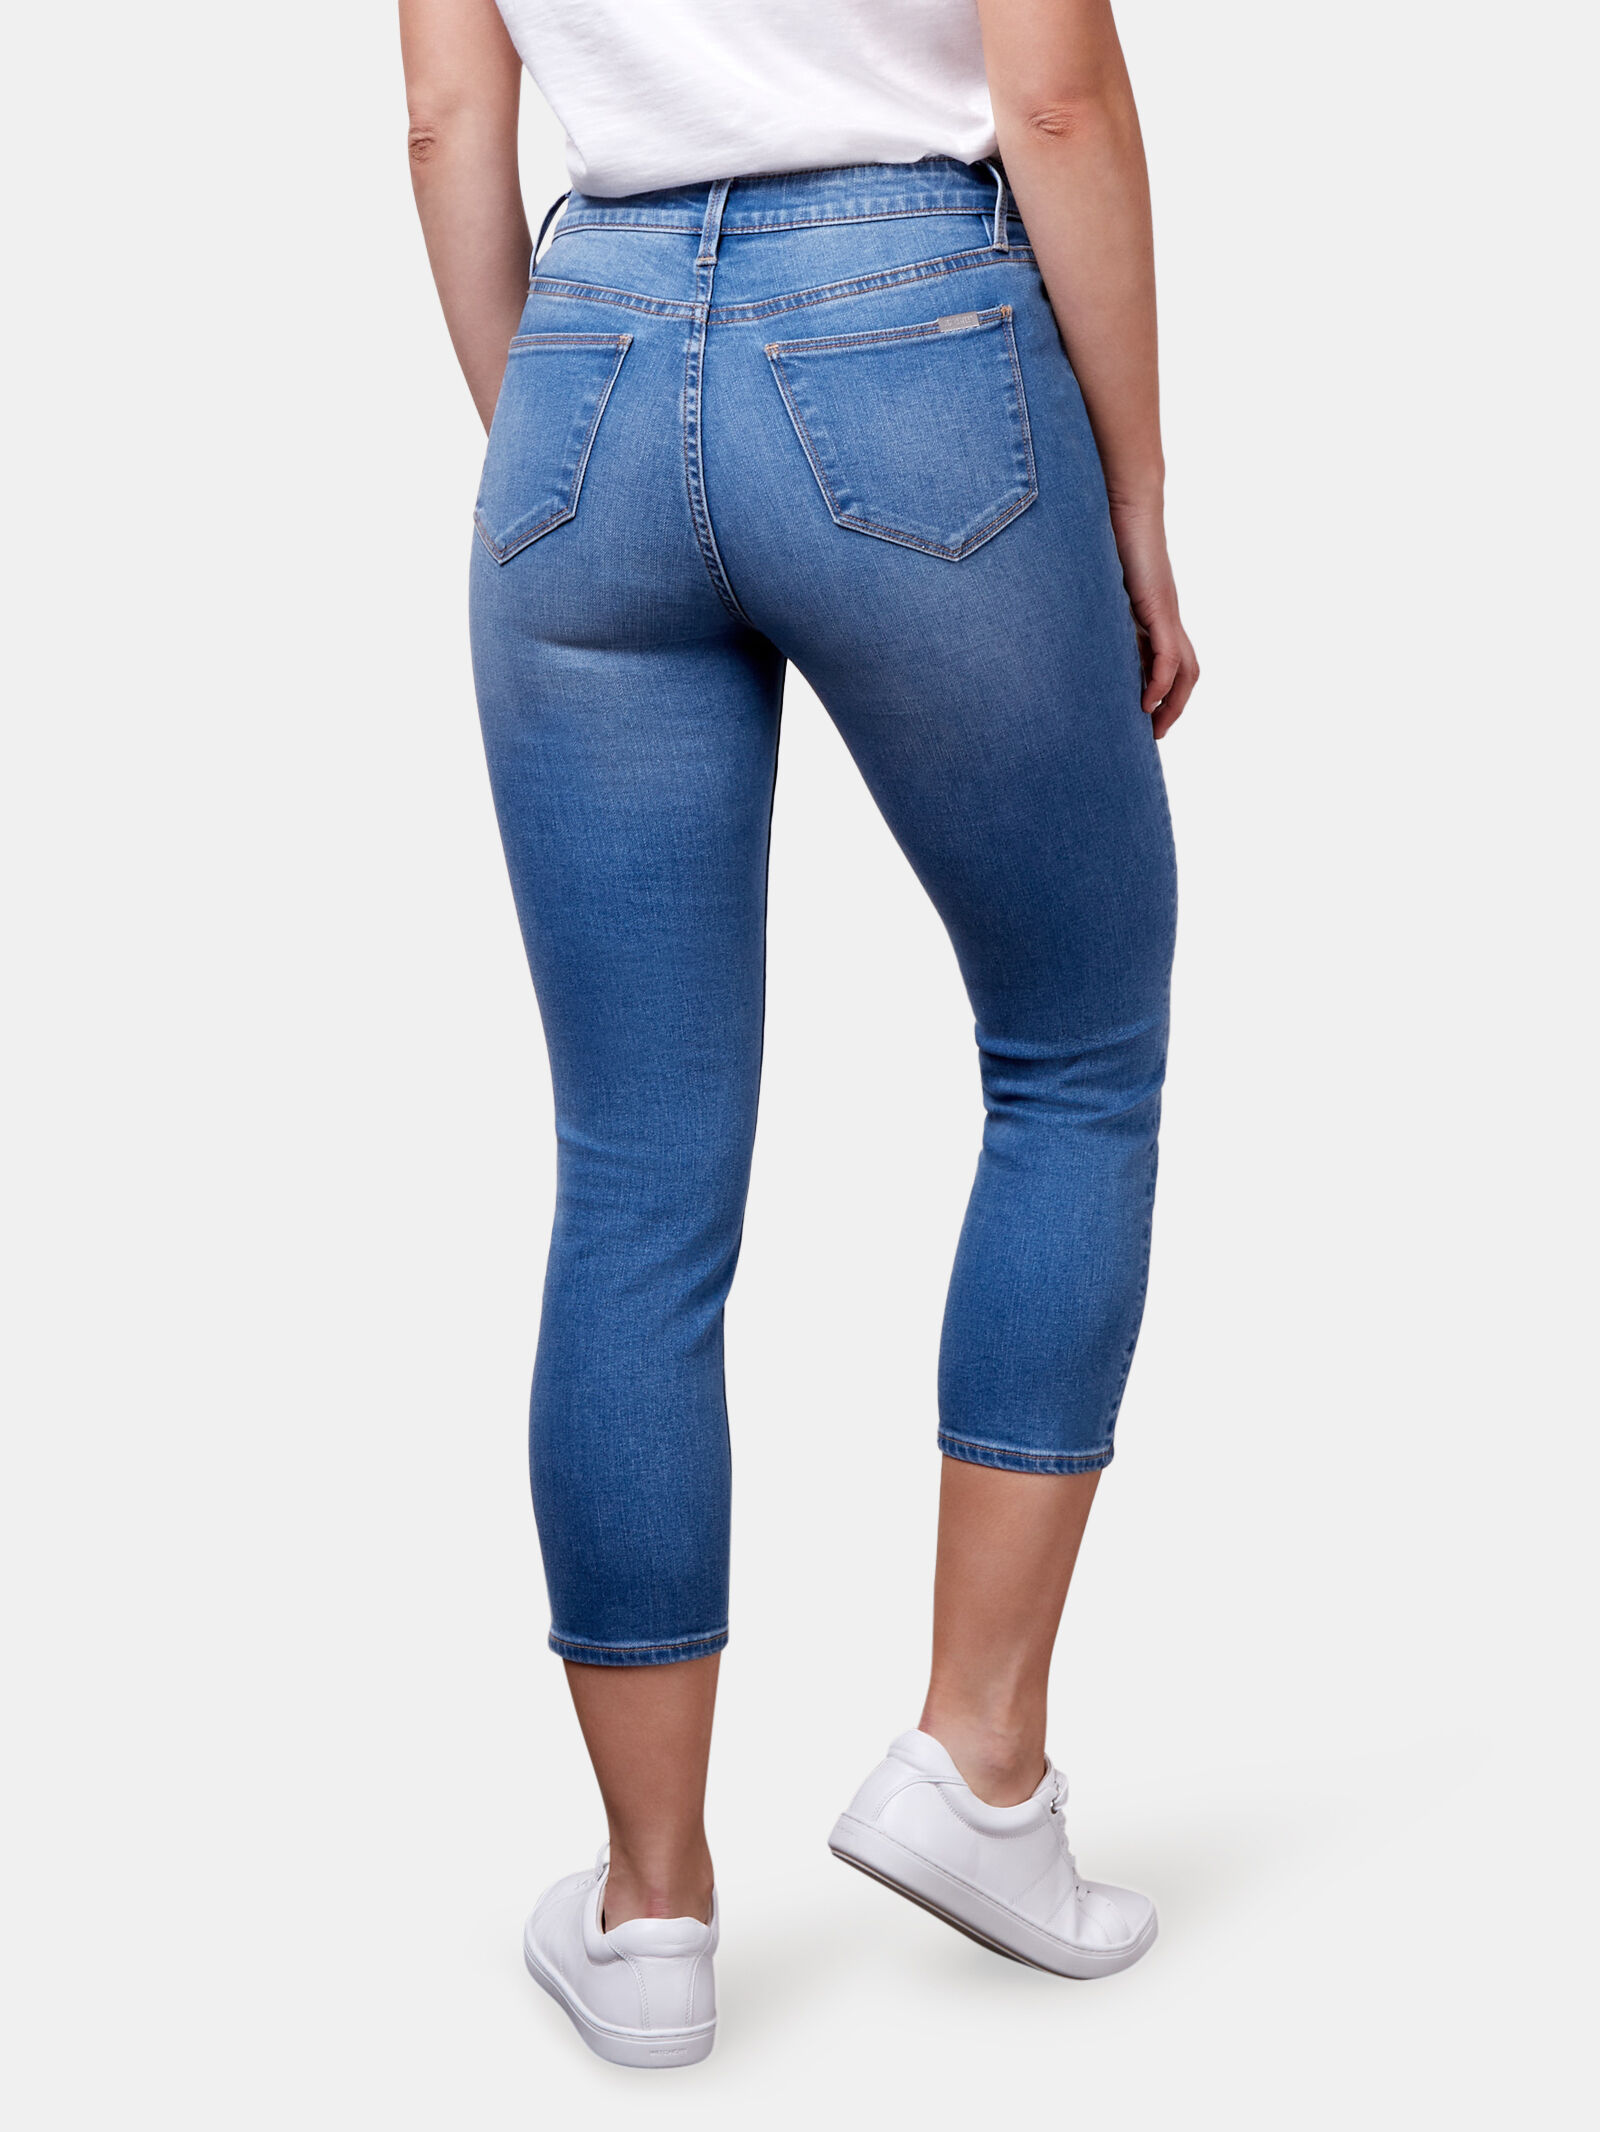 Natural Womens Clothing Jeans Capri and cropped jeans Nine:inthe:morning Denim Trousers in Sand 